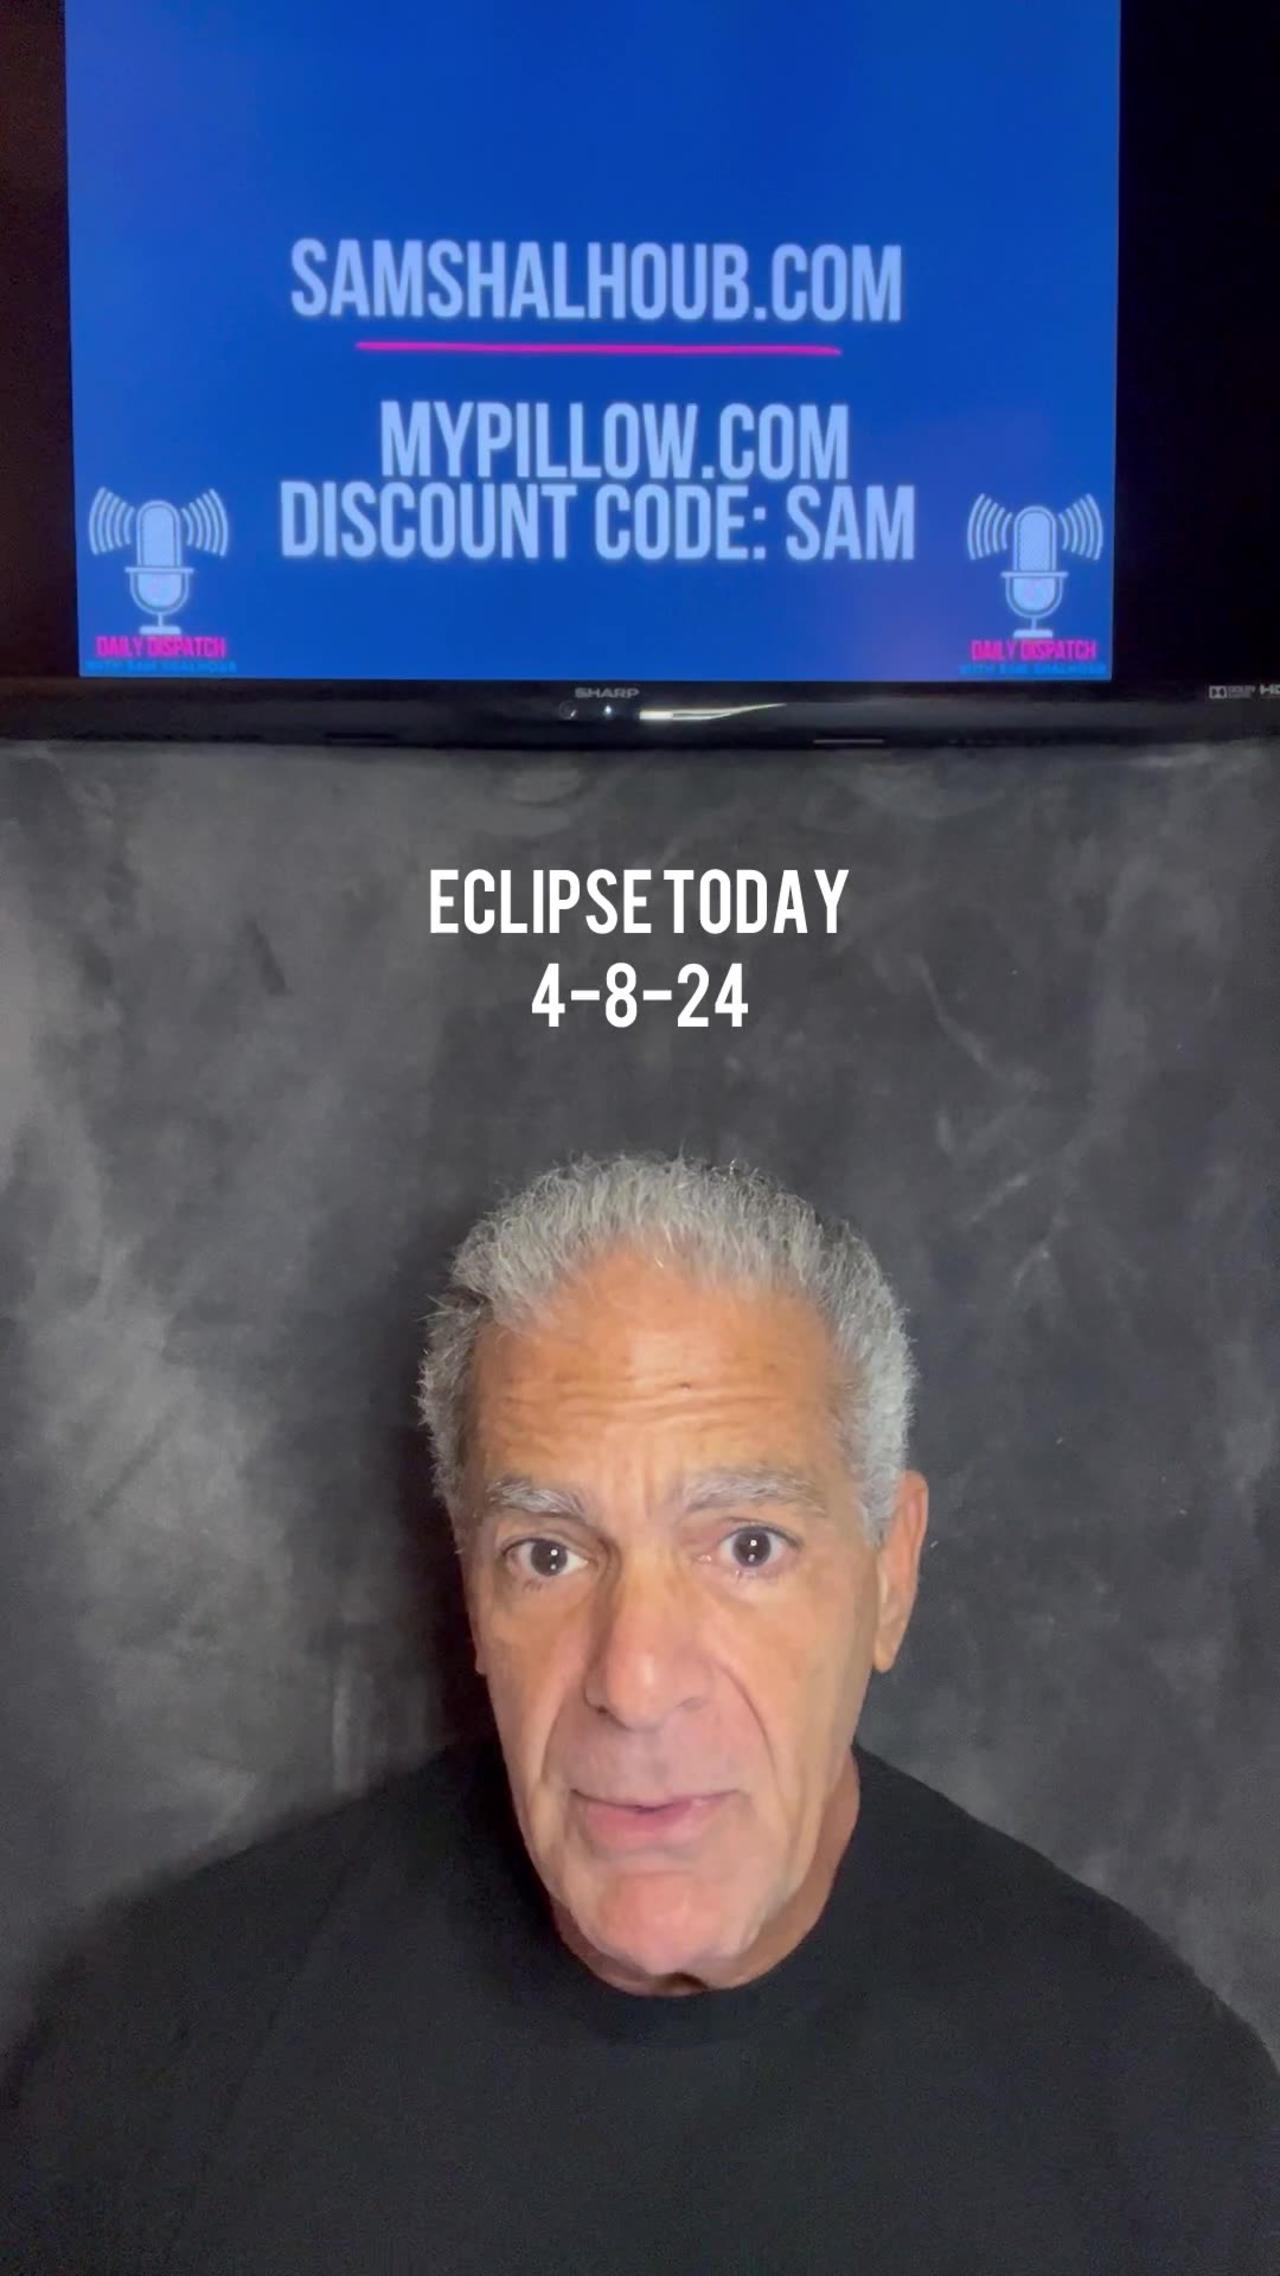 Eclipse Today